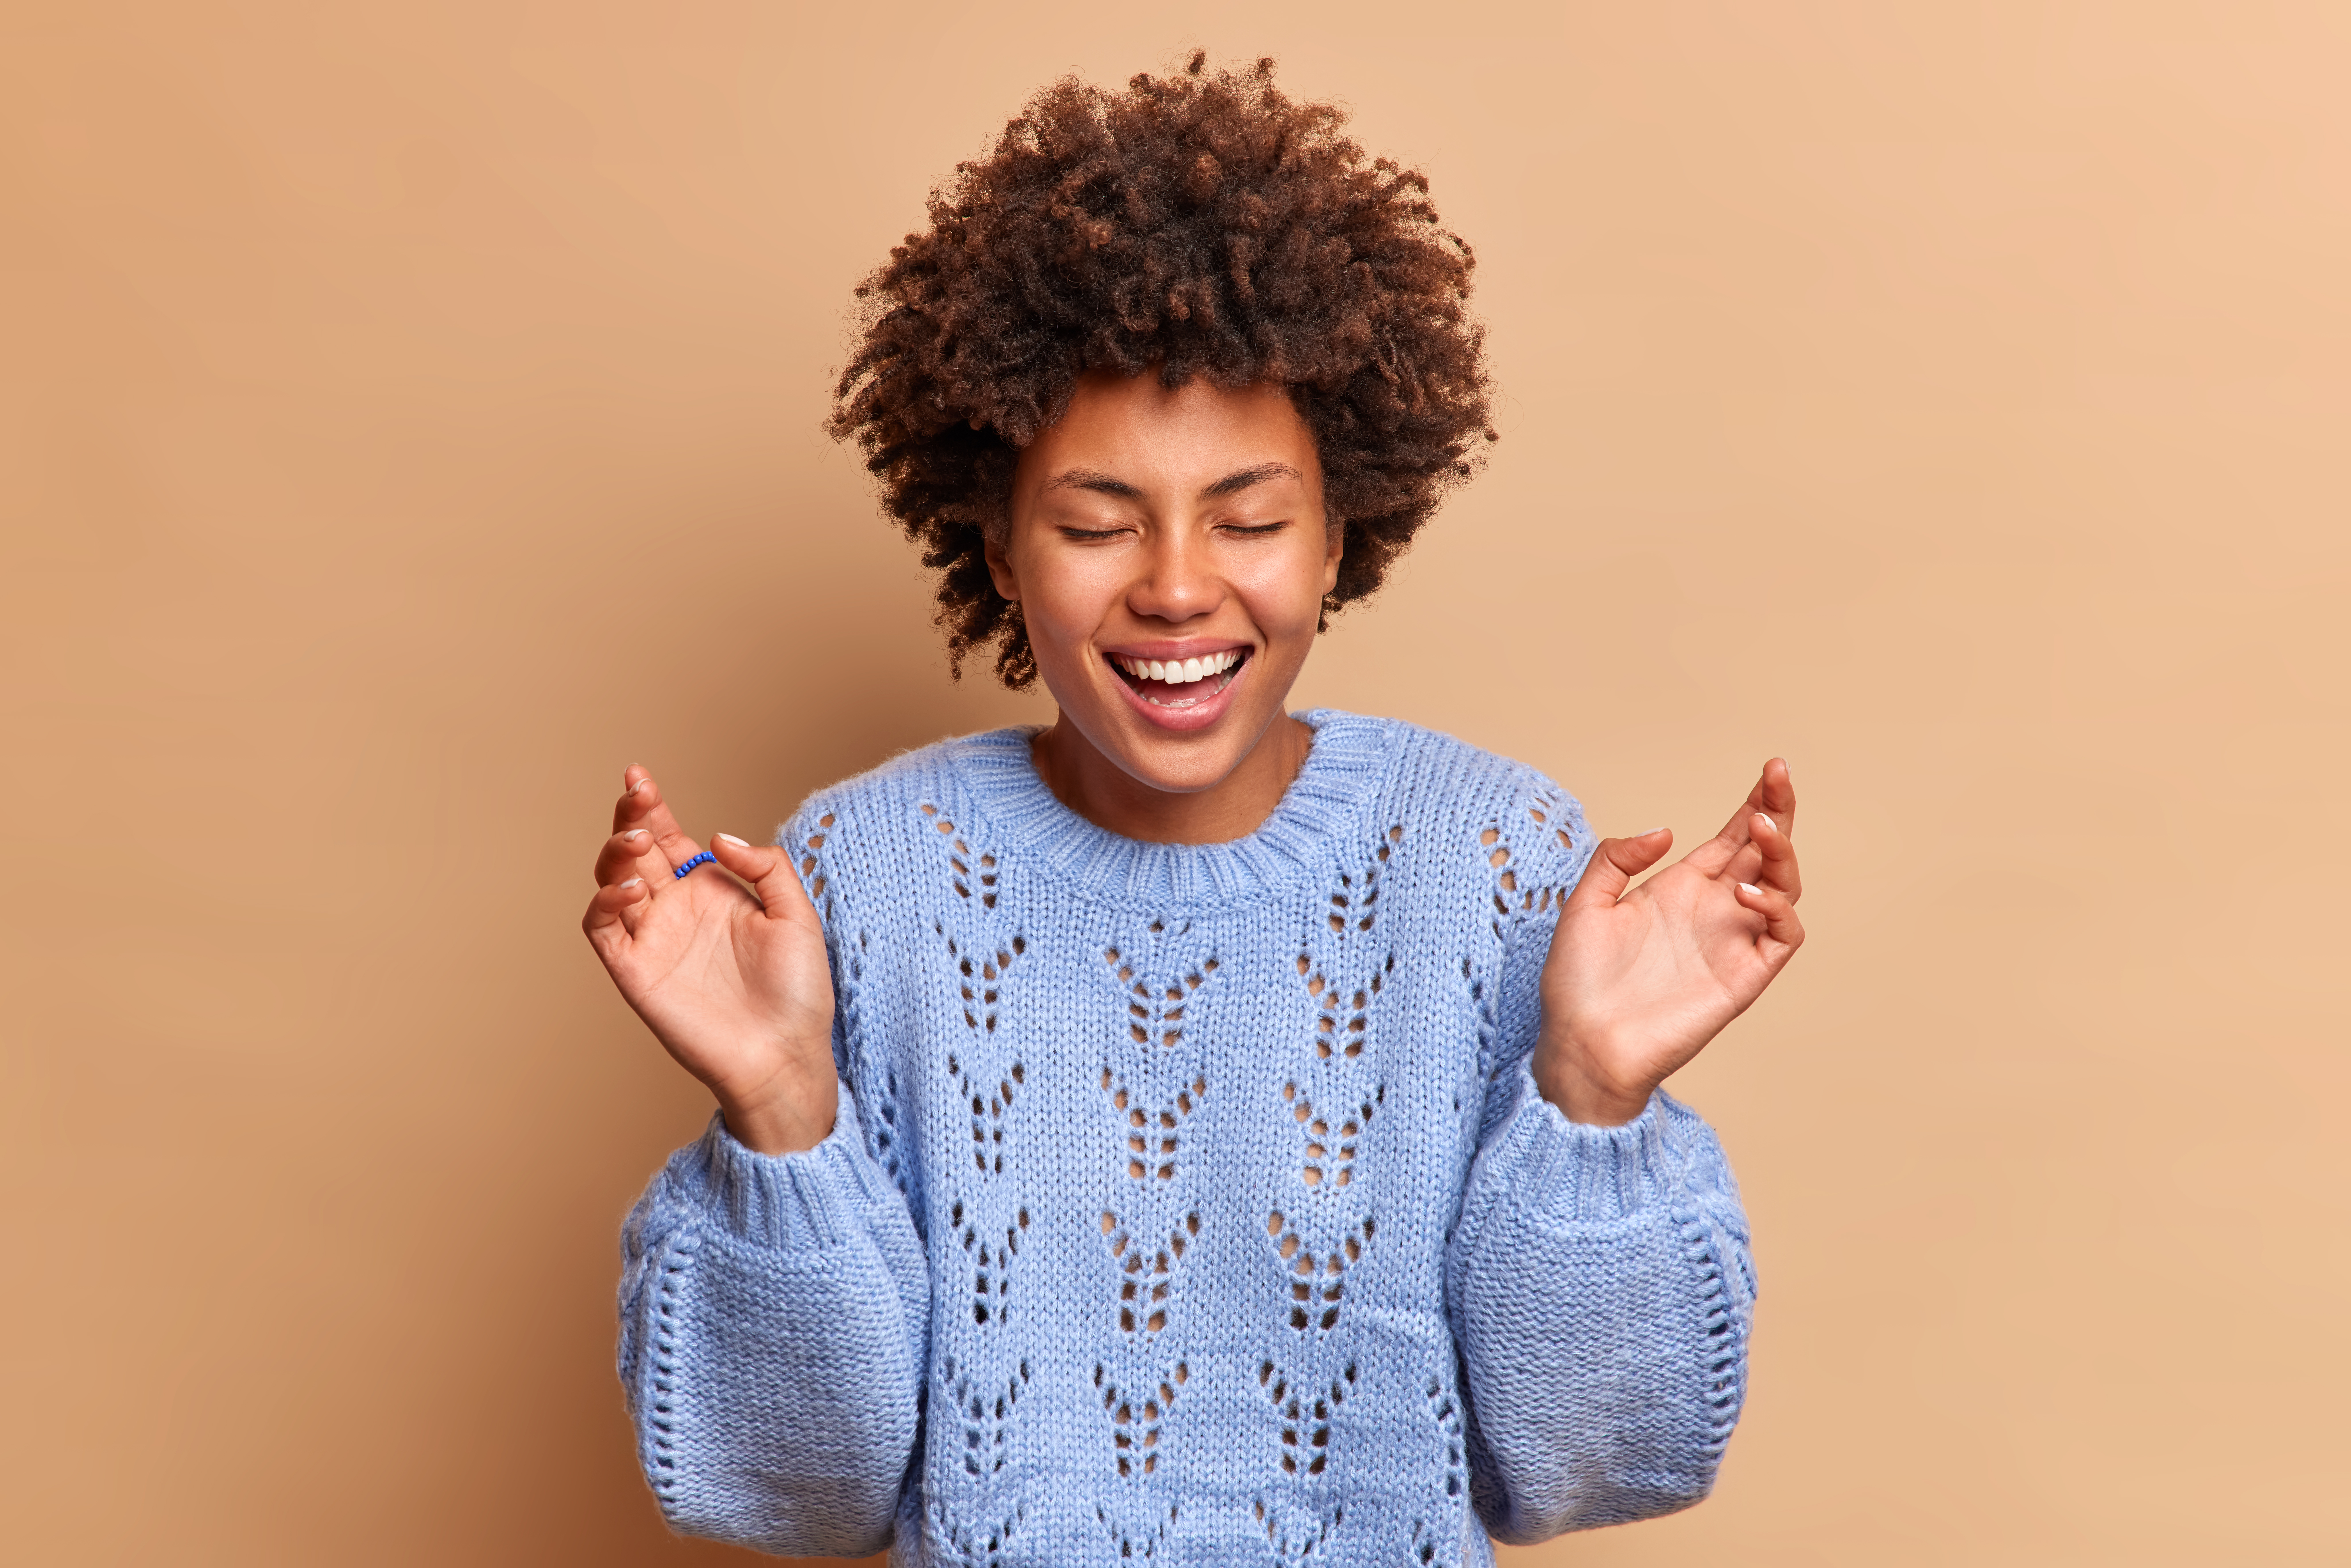 Laughter Yoga Benefits: Boosting Joy and Well-Being